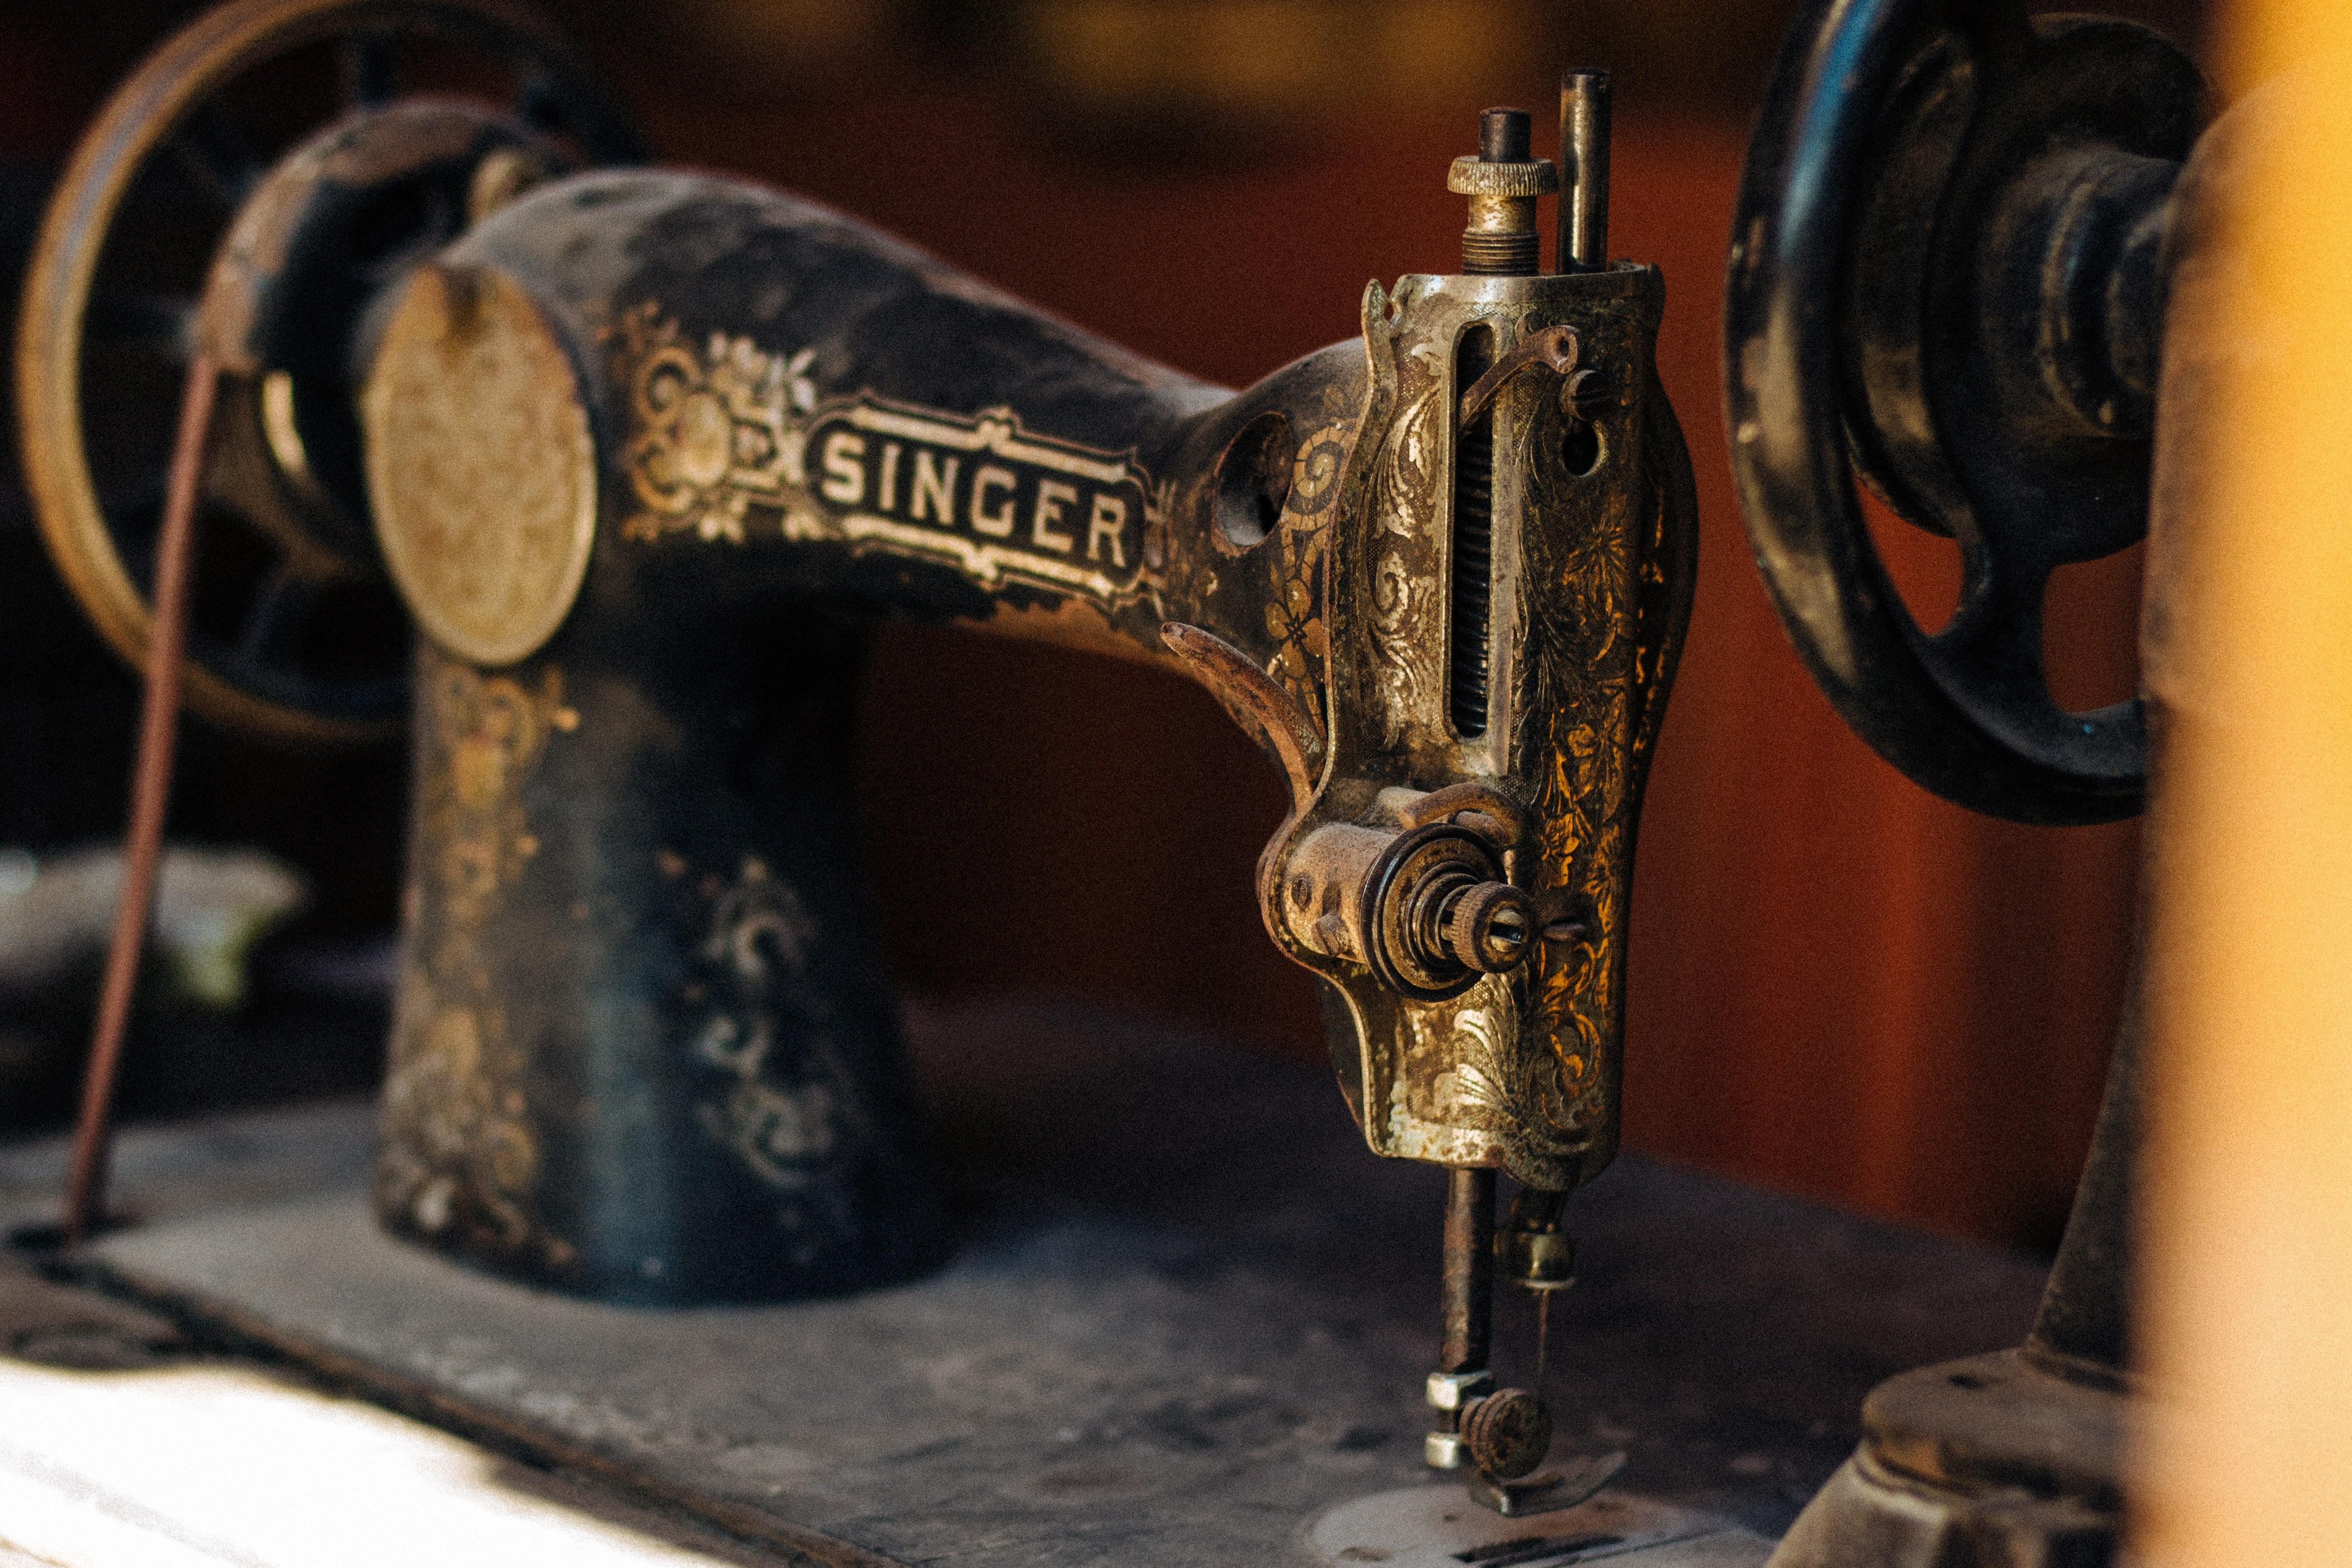 Catherine found an antique sewing machine inside the trunk | Photo: Unsplash